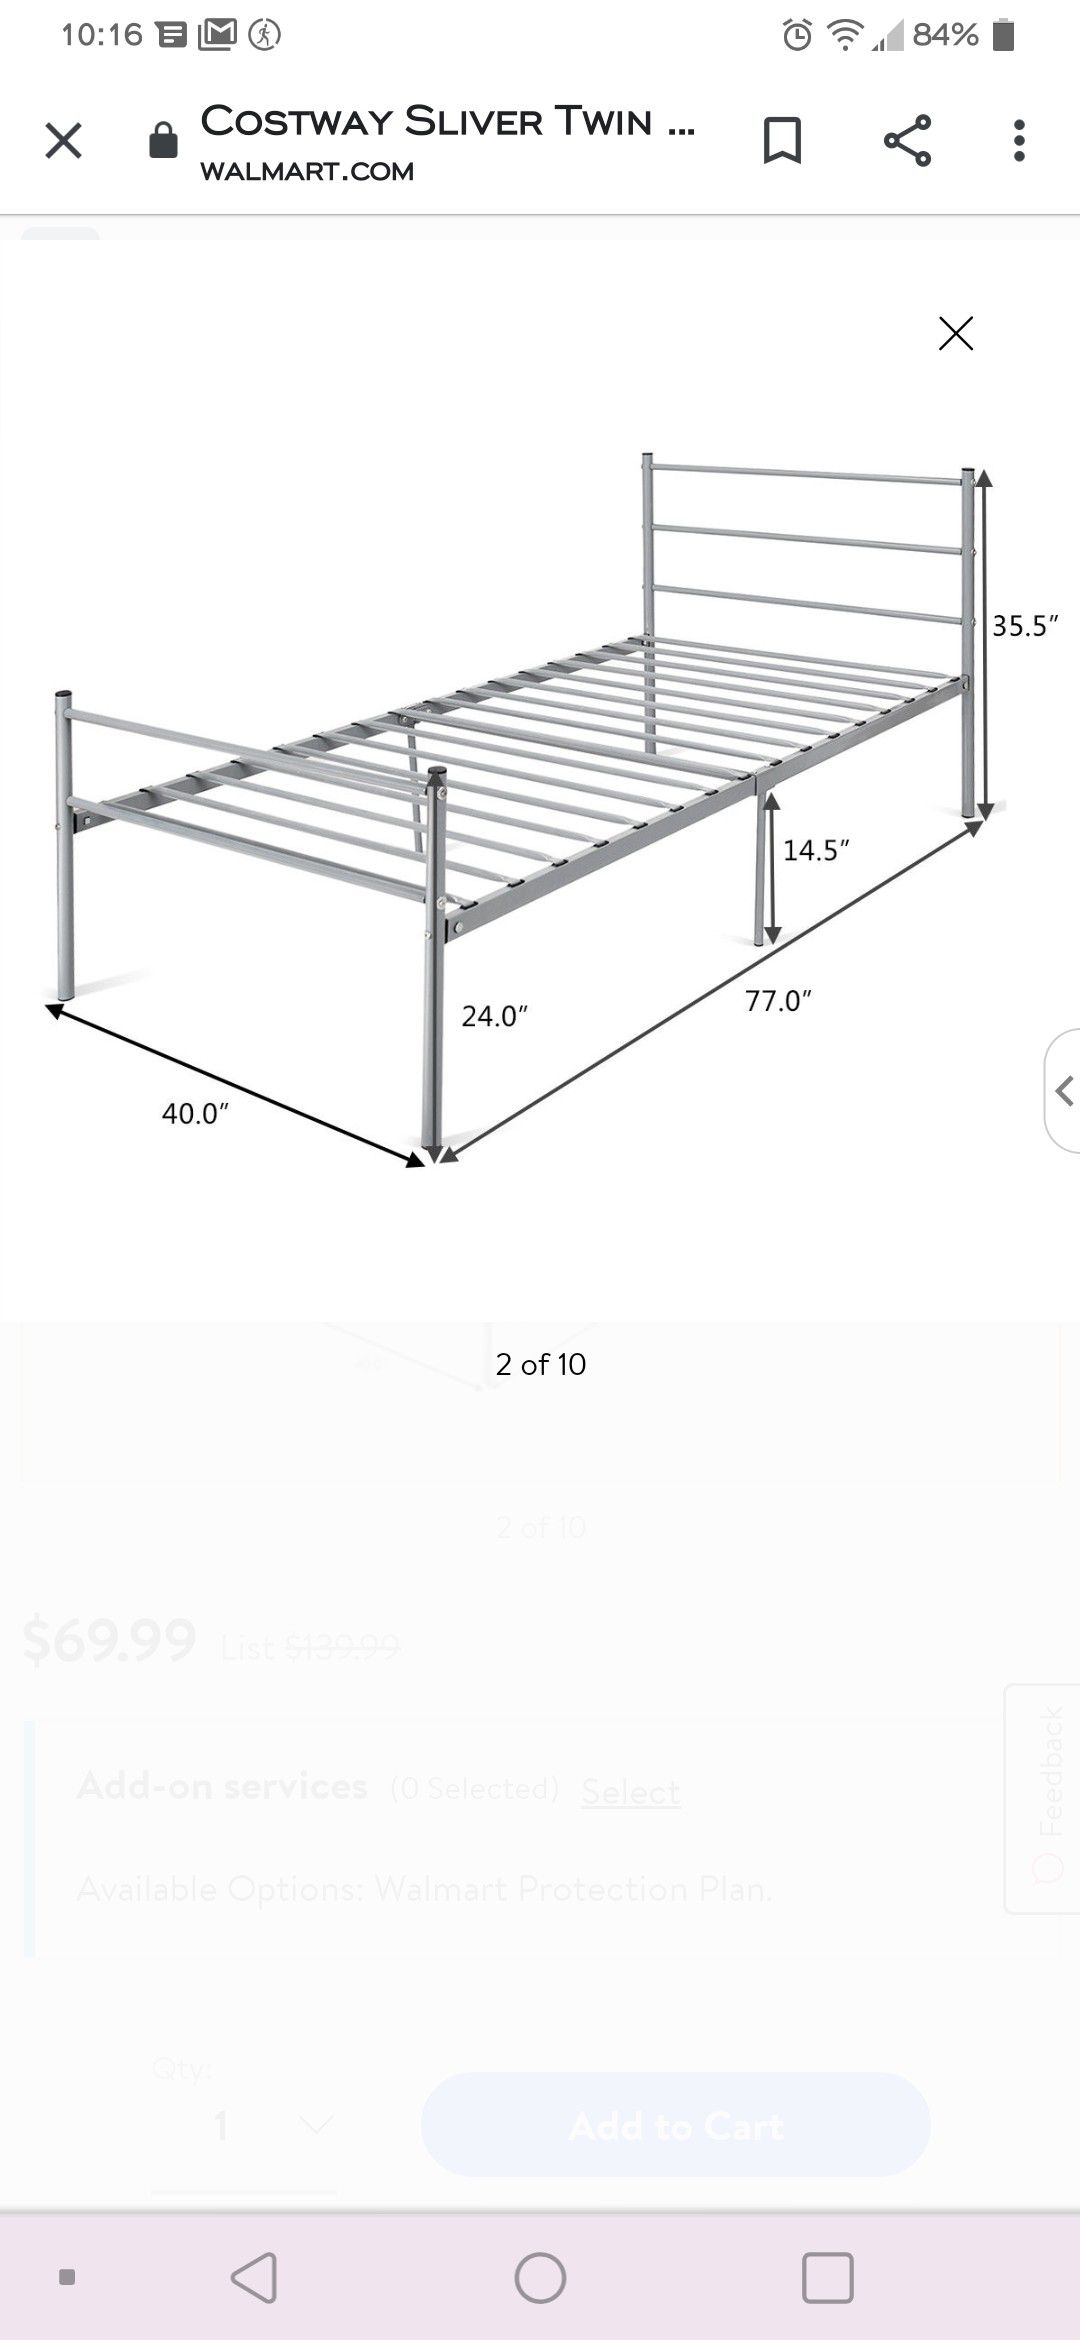 Two twin metal bed frames with twin mattress